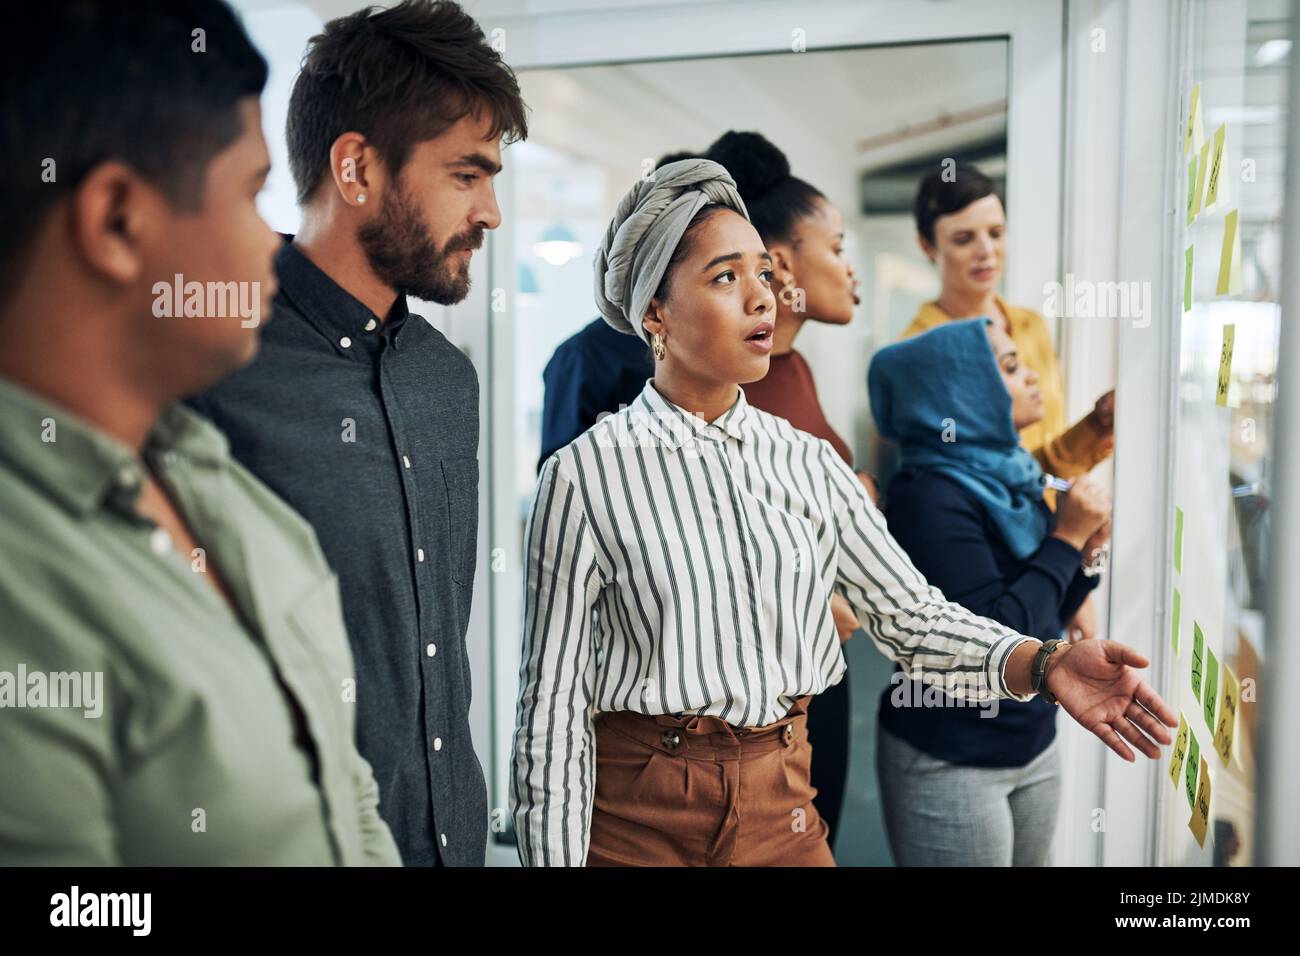 Discussing the big plans they all have. a group of businesspeople brainstorming with notes on a glass wall in an office. Stock Photo